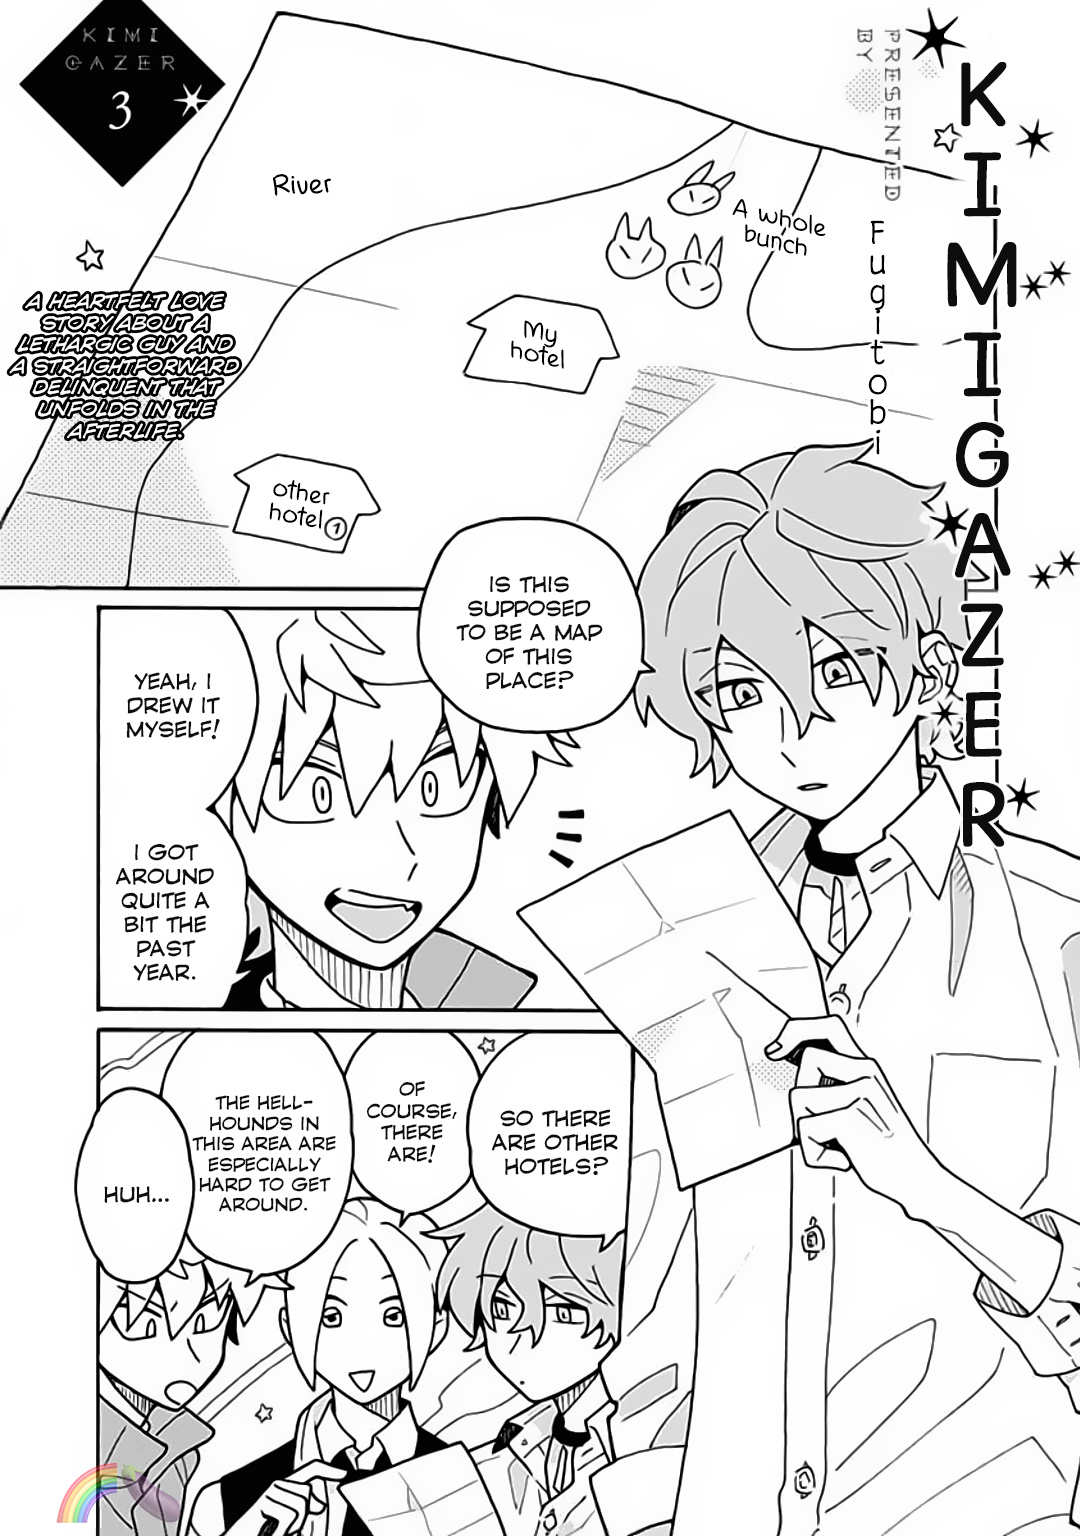 Kimigazer Vol.1 Chapter 3 - Picture 2